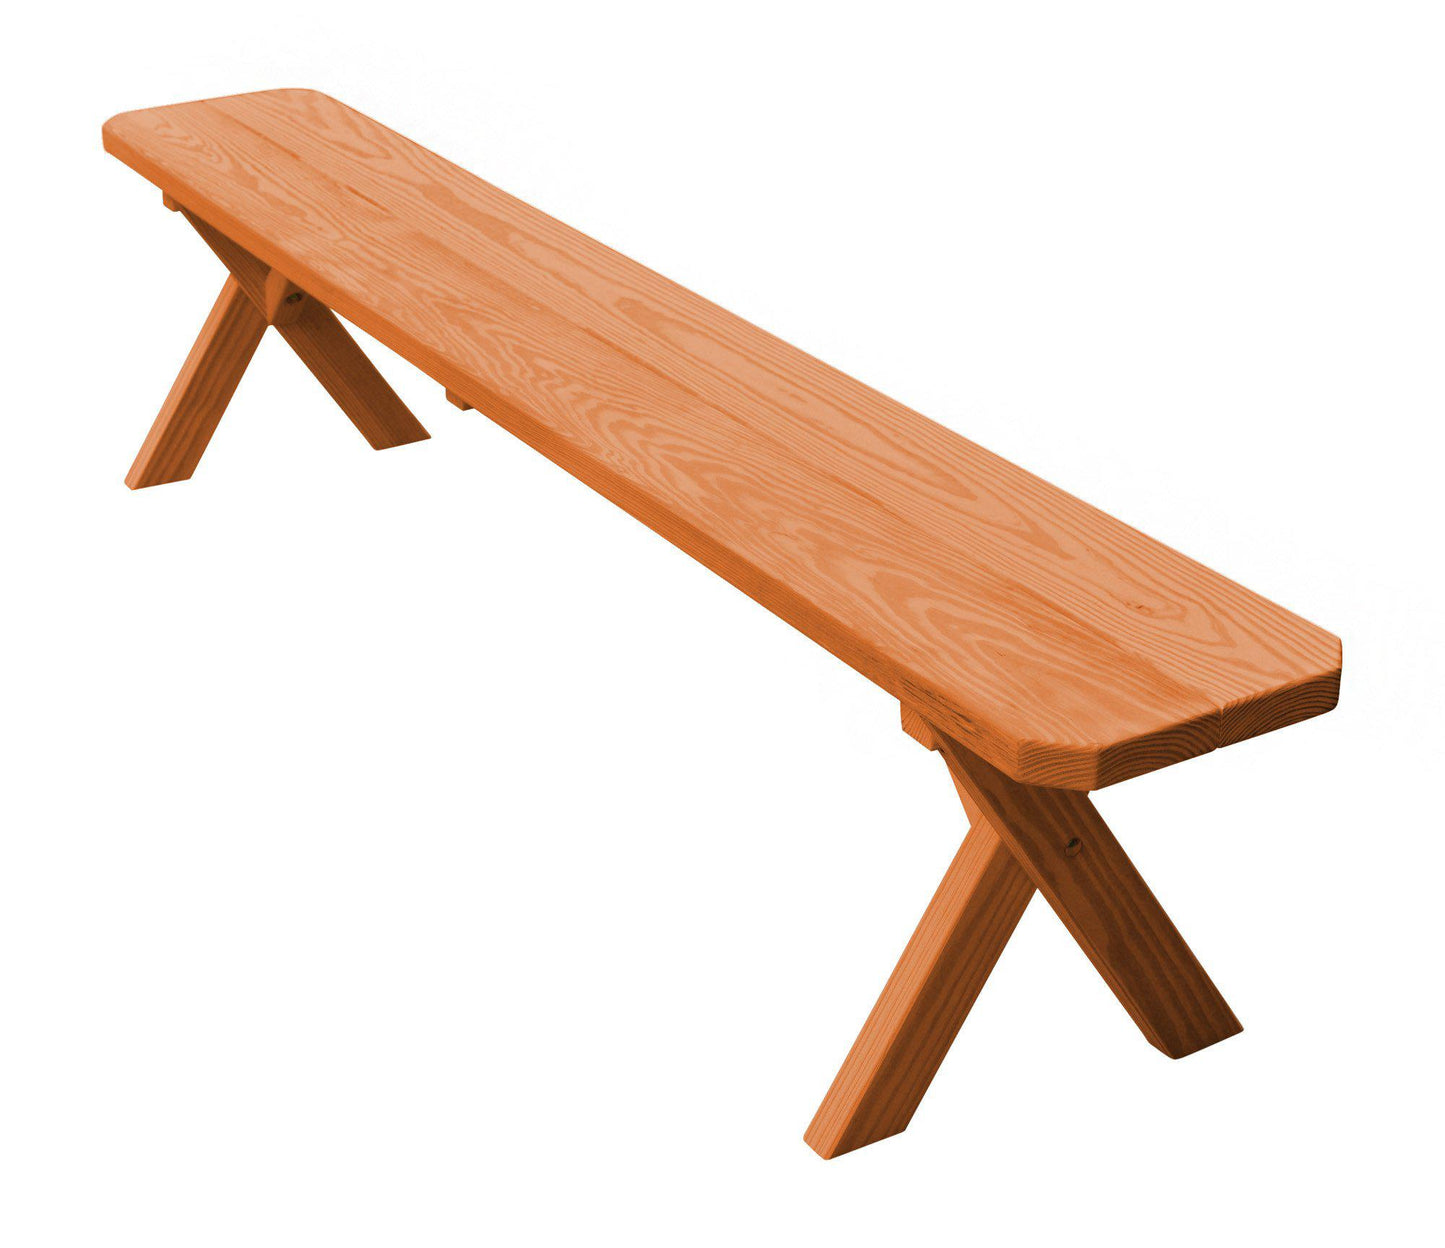 A&L Furniture Co. Pressure Treated Pine 70" Crossleg Bench Only - LEAD TIME TO SHIP 10 BUSINESS DAYS